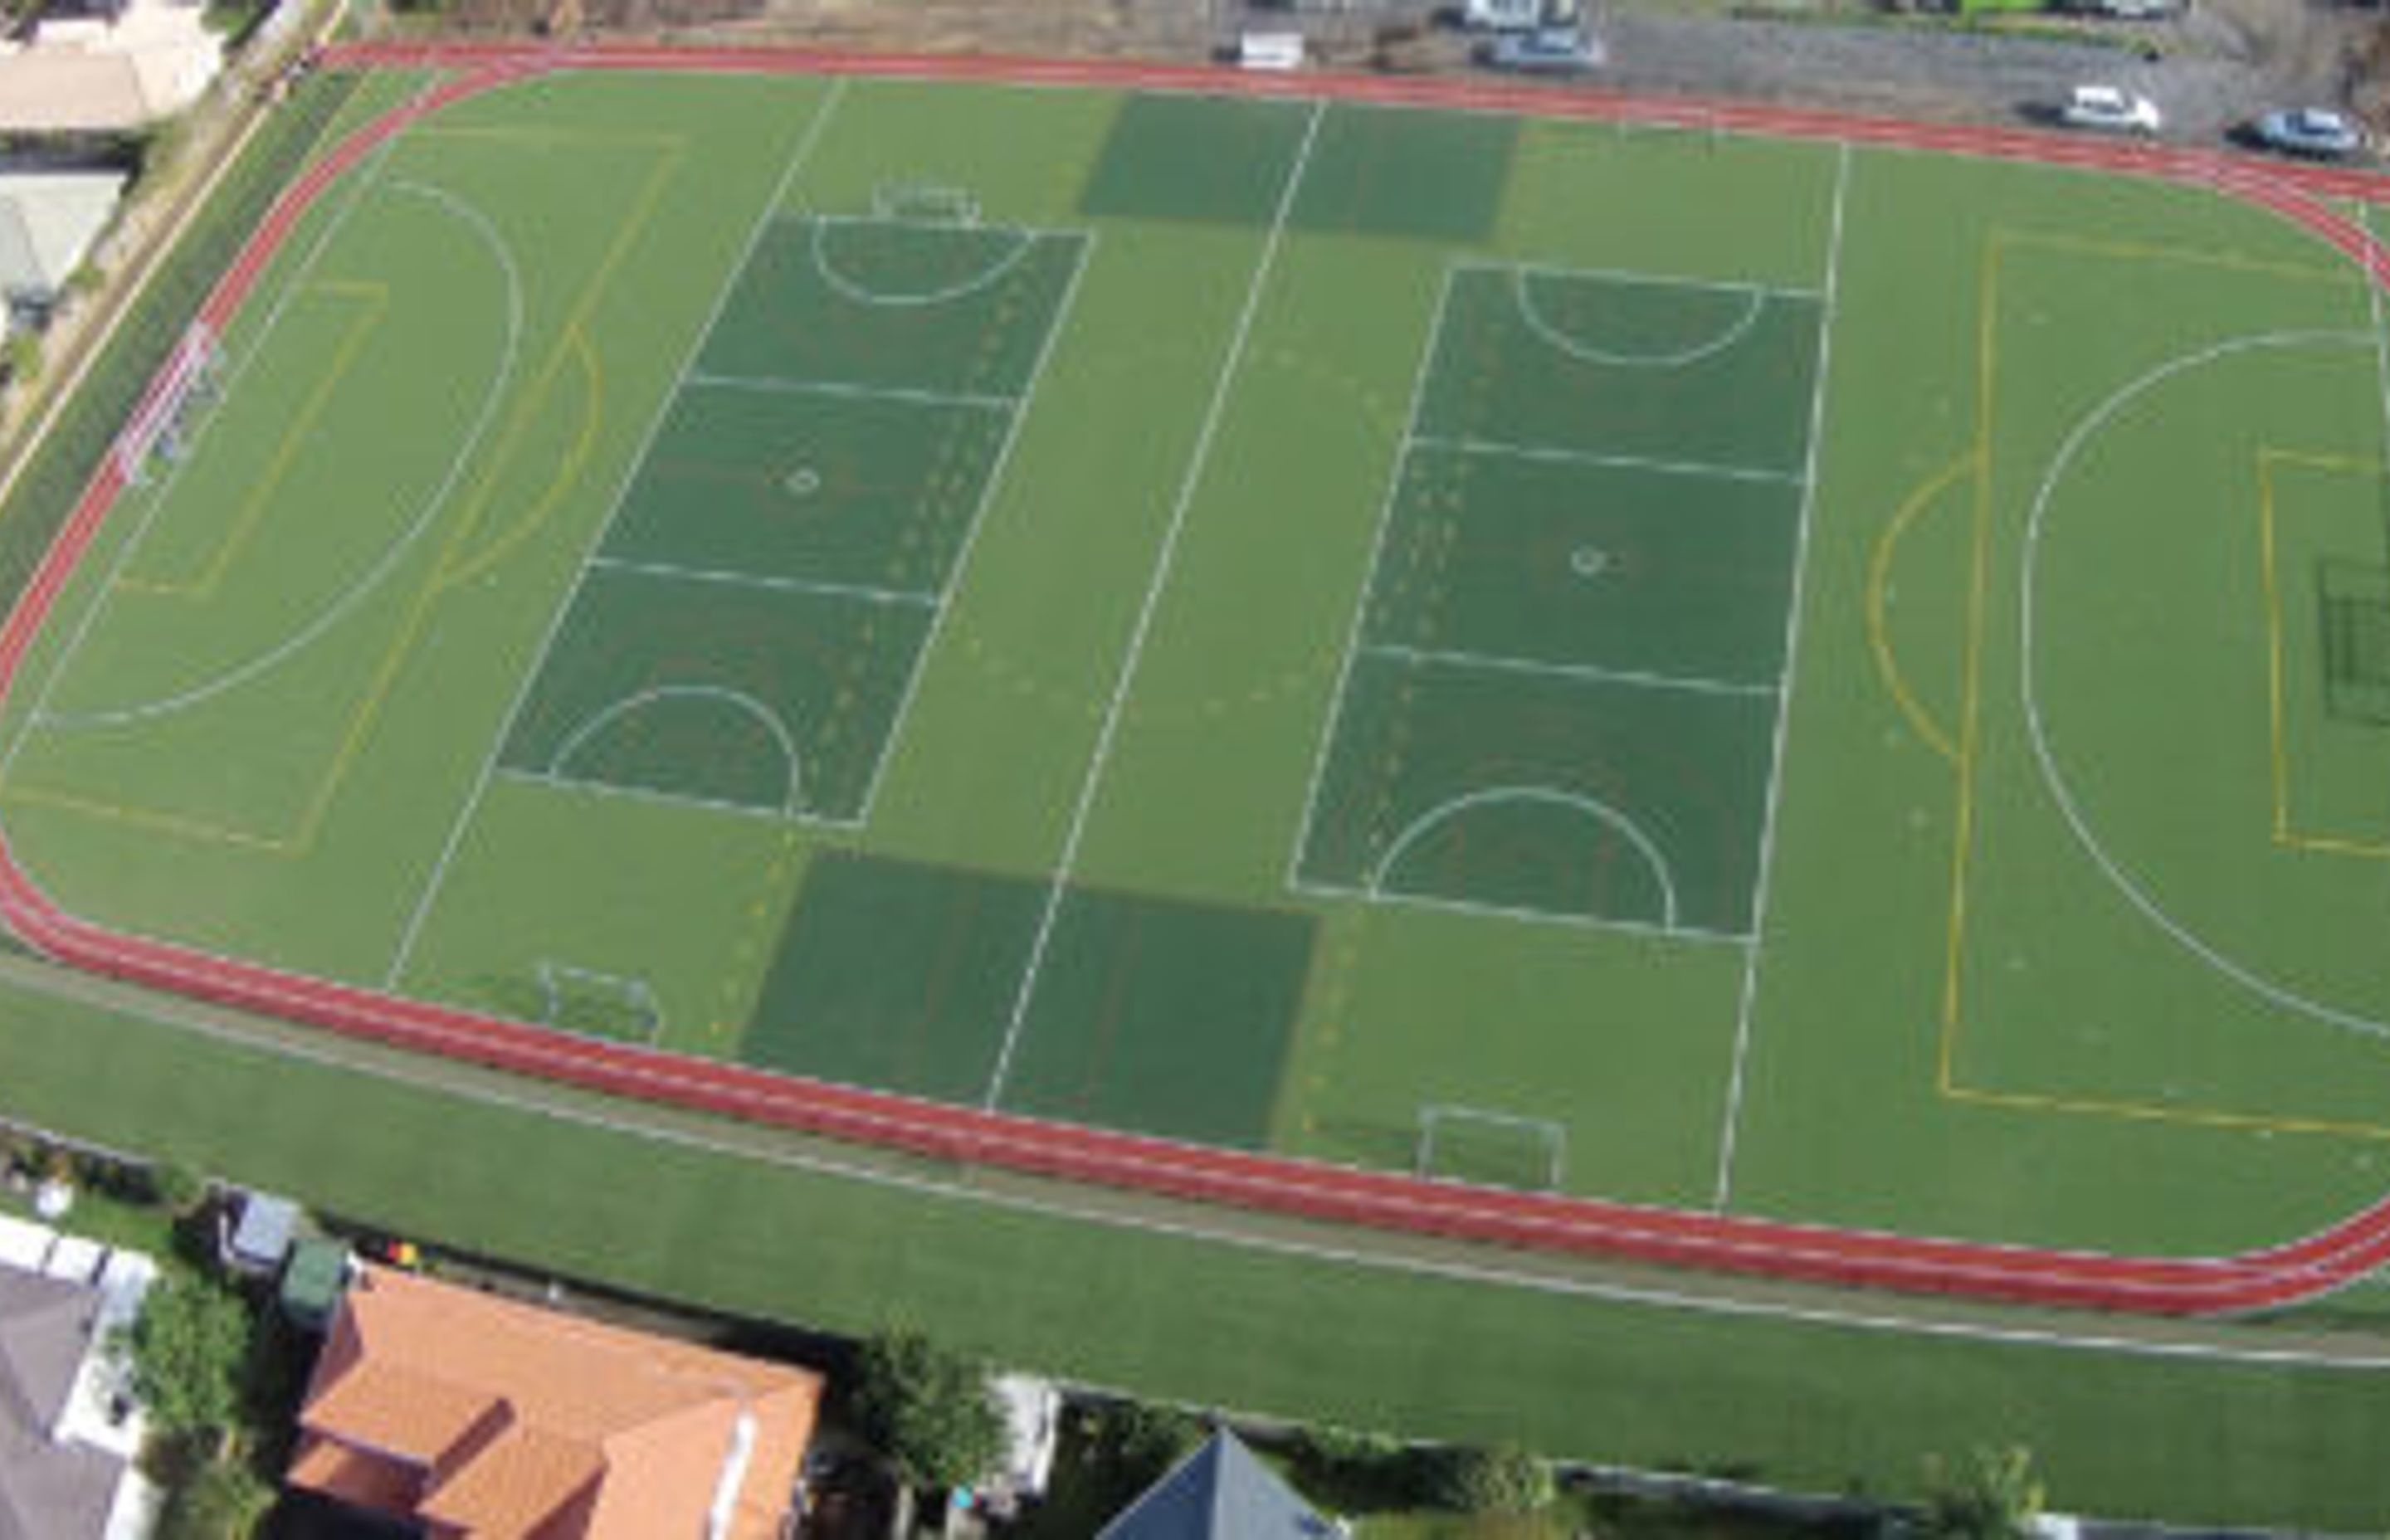 Five Benefits of Multi-Sports Turf for Schools